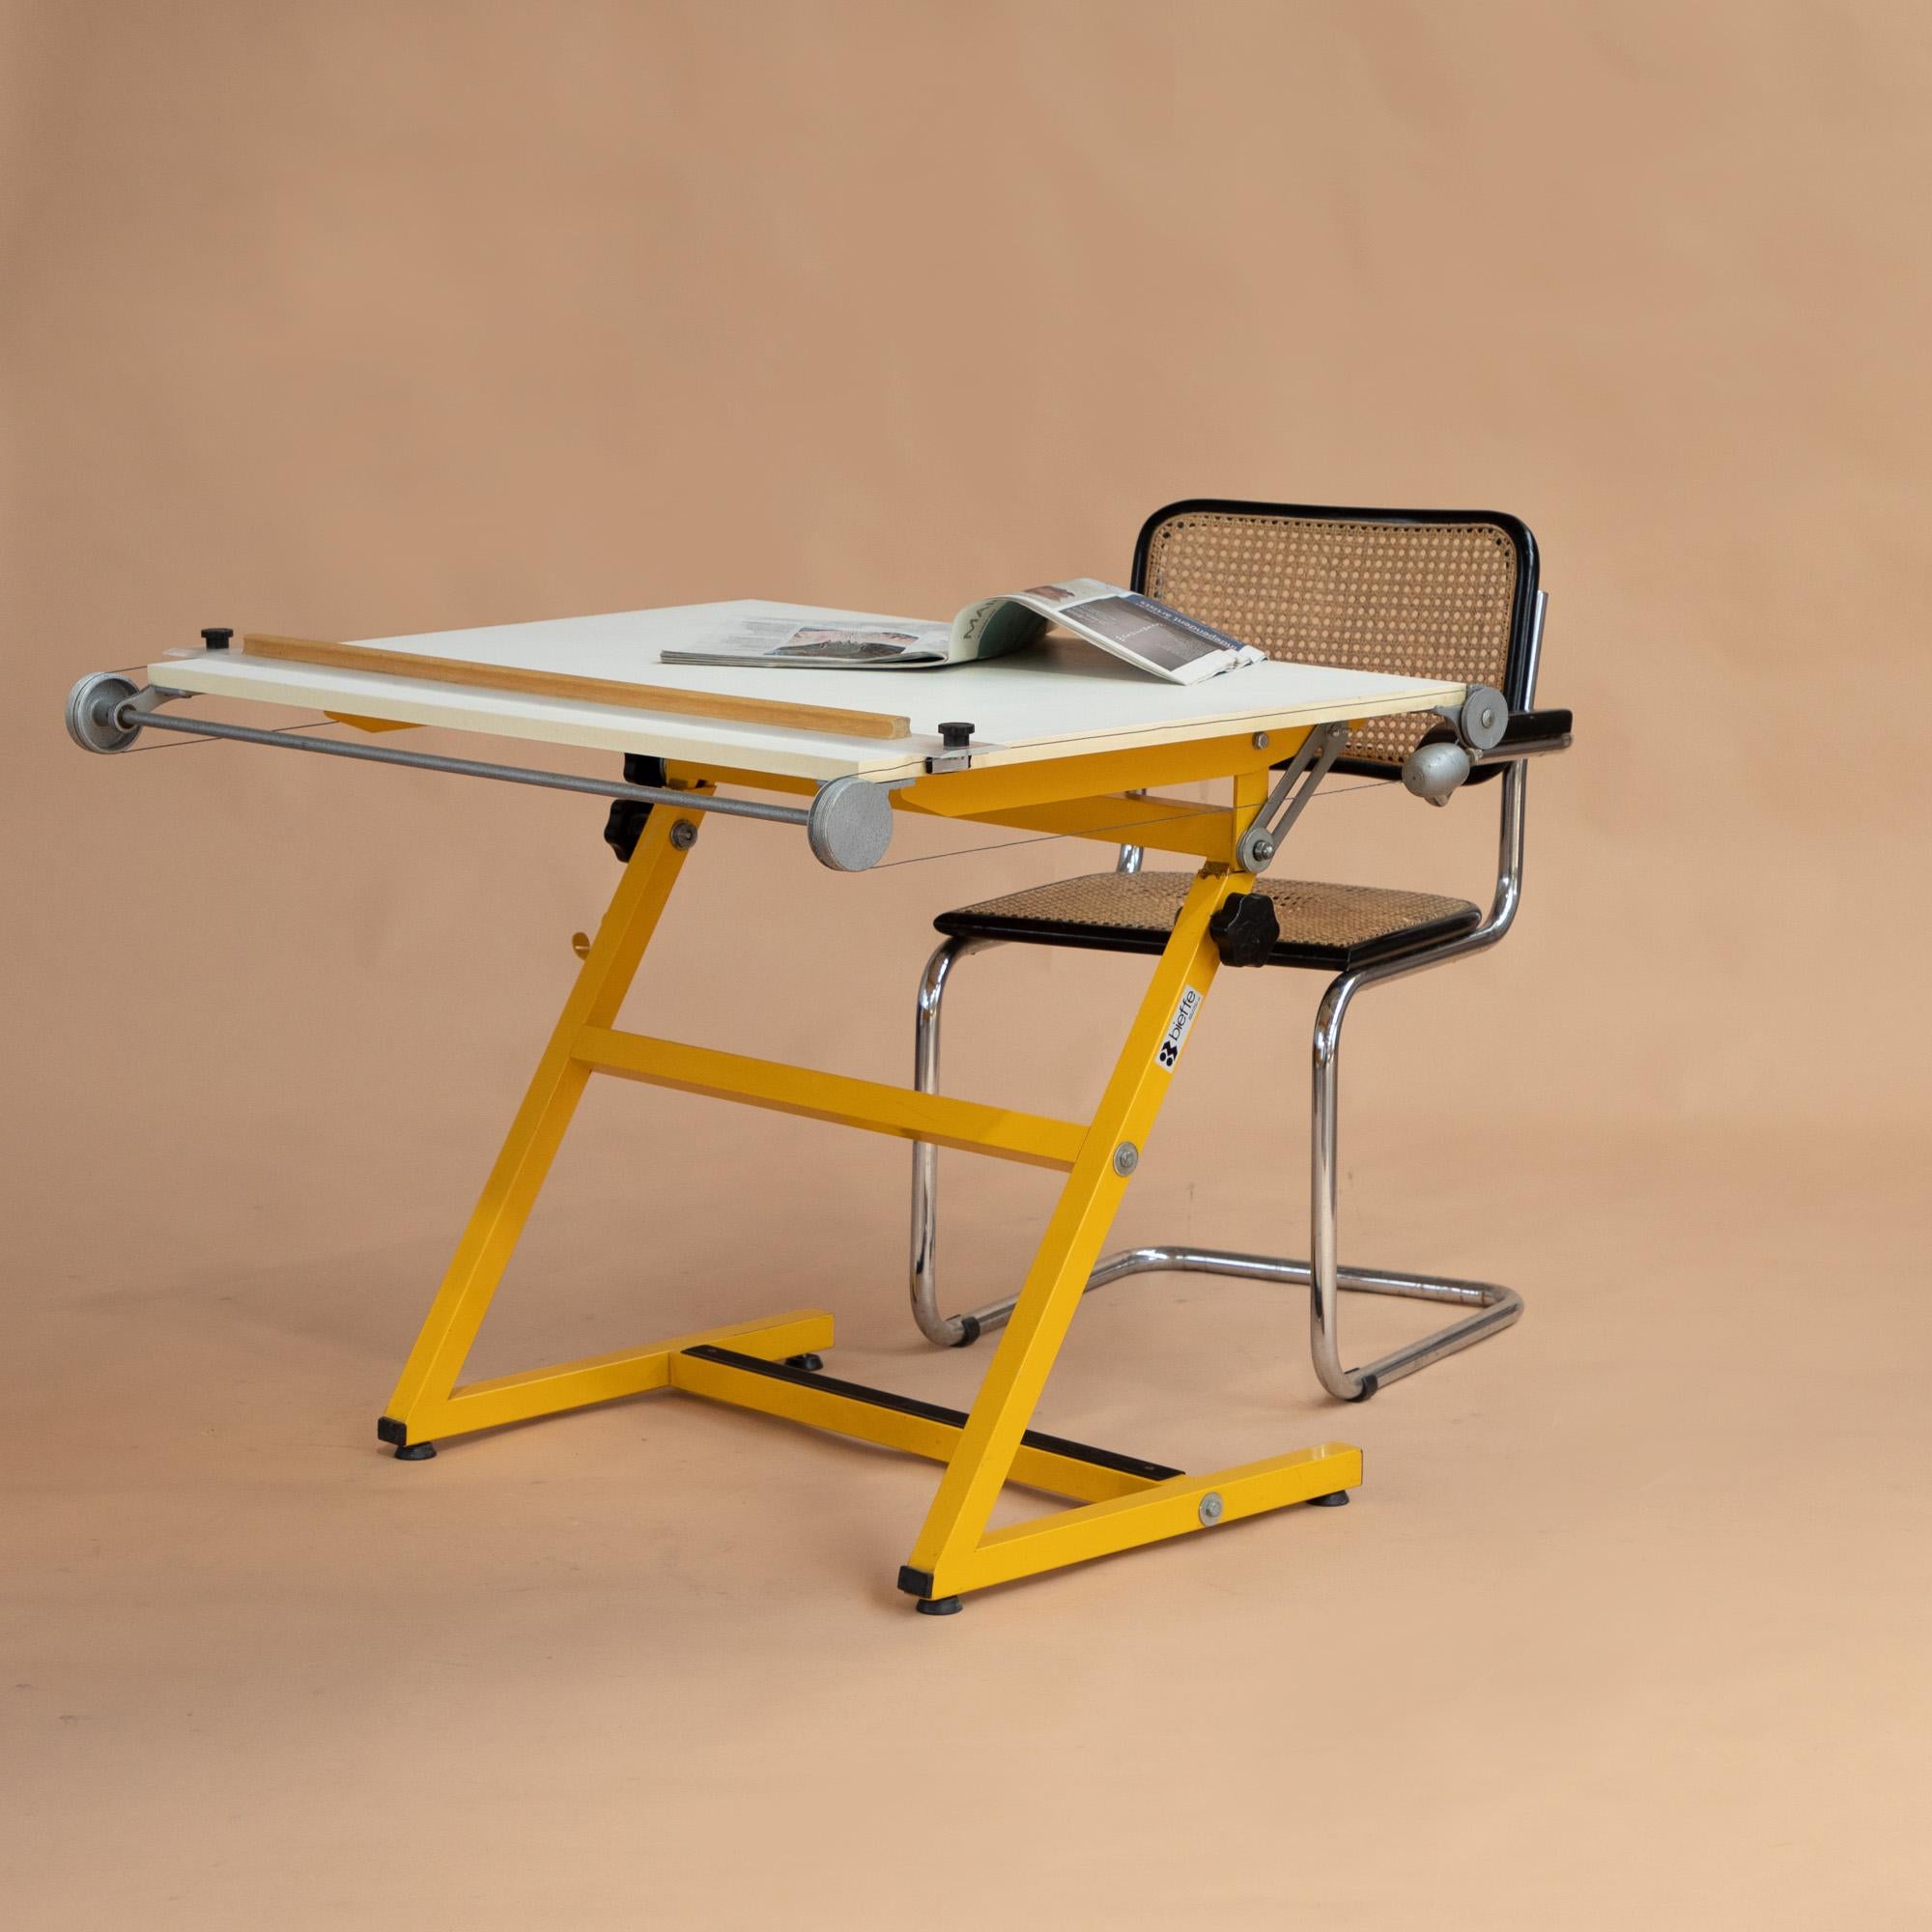 Versatile architects drafting table come desk manufactured by biefflplast. 
This is in great condition. Vibrant yellow coated metal frame makes a real statement. Manufacturers label is still visible. 
The white laminate drawing board can be